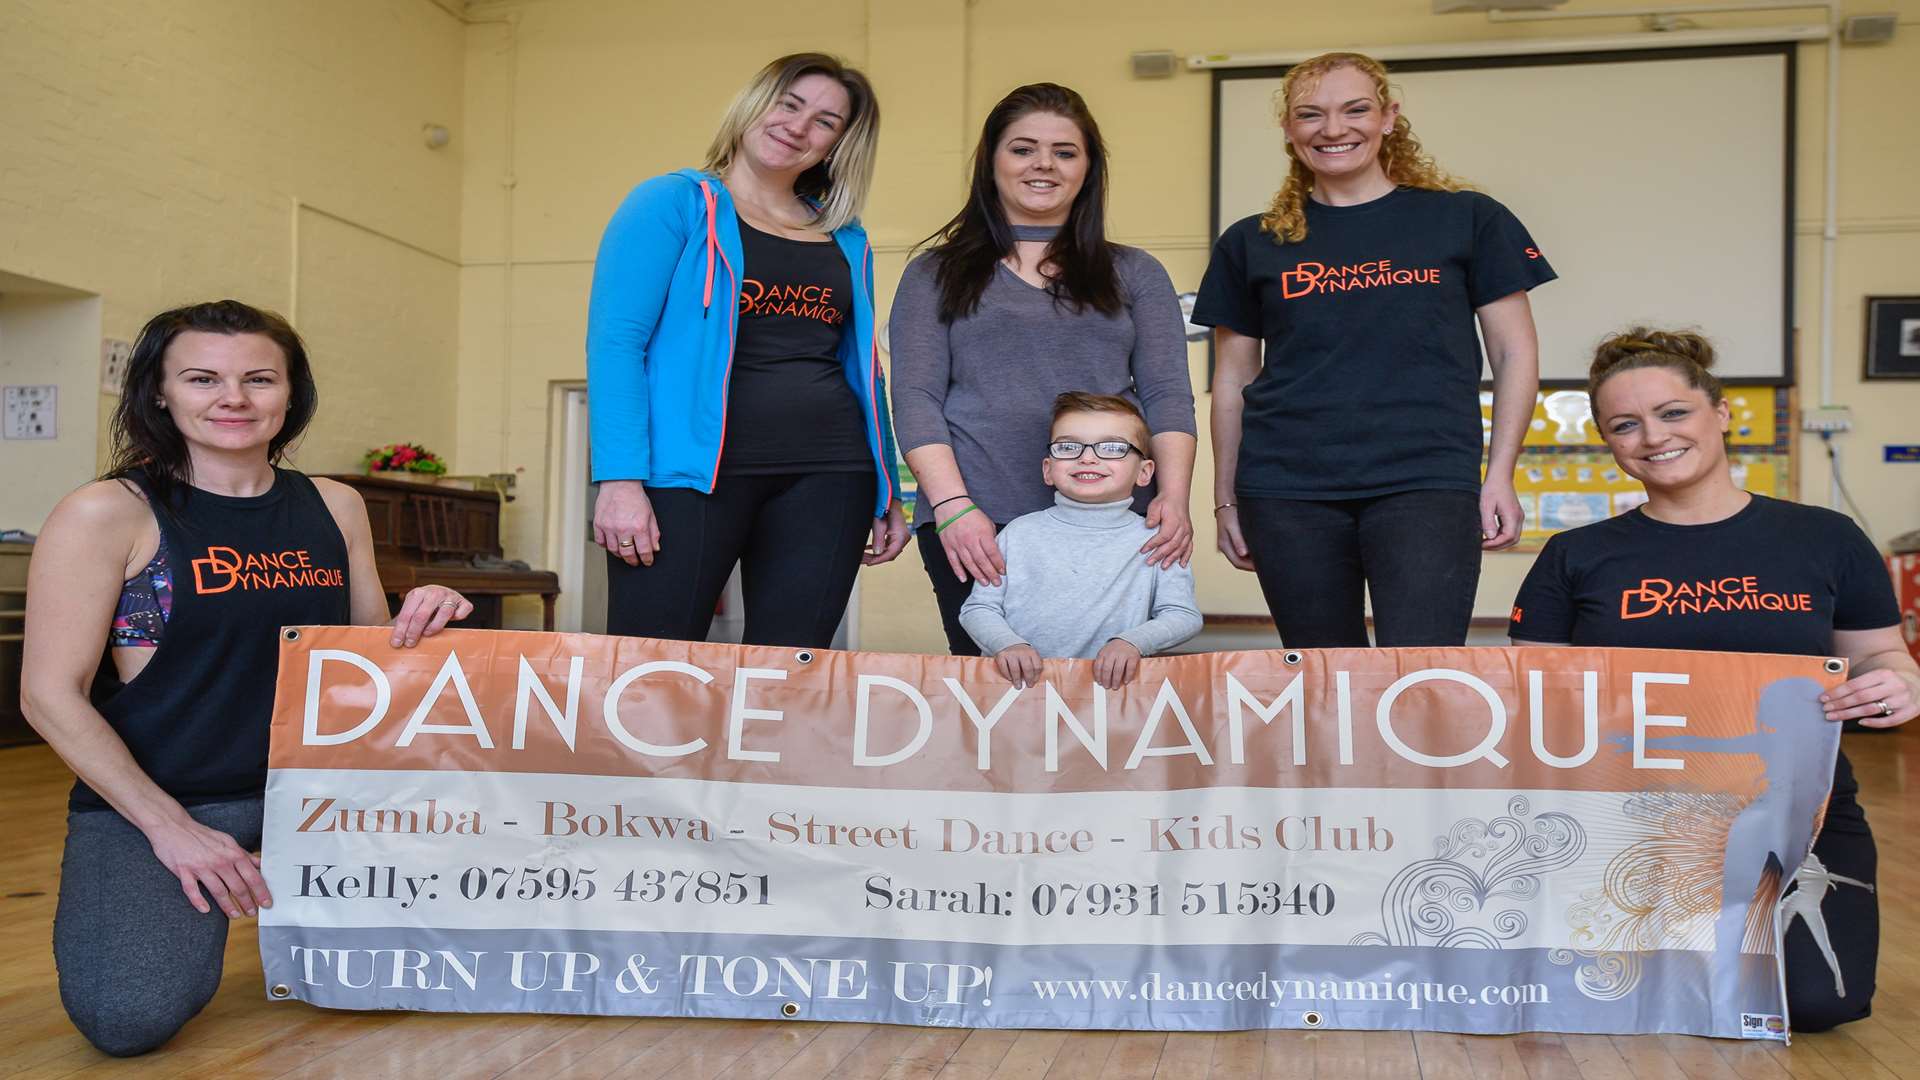 Dance Dynamique is holding a fundraising performance for Theo's Mission to Walk. Here he's pictured with Sophie Morrish, Kelly Woodward, mum Naomi Morton, Sarah Maynard and Emma Fay